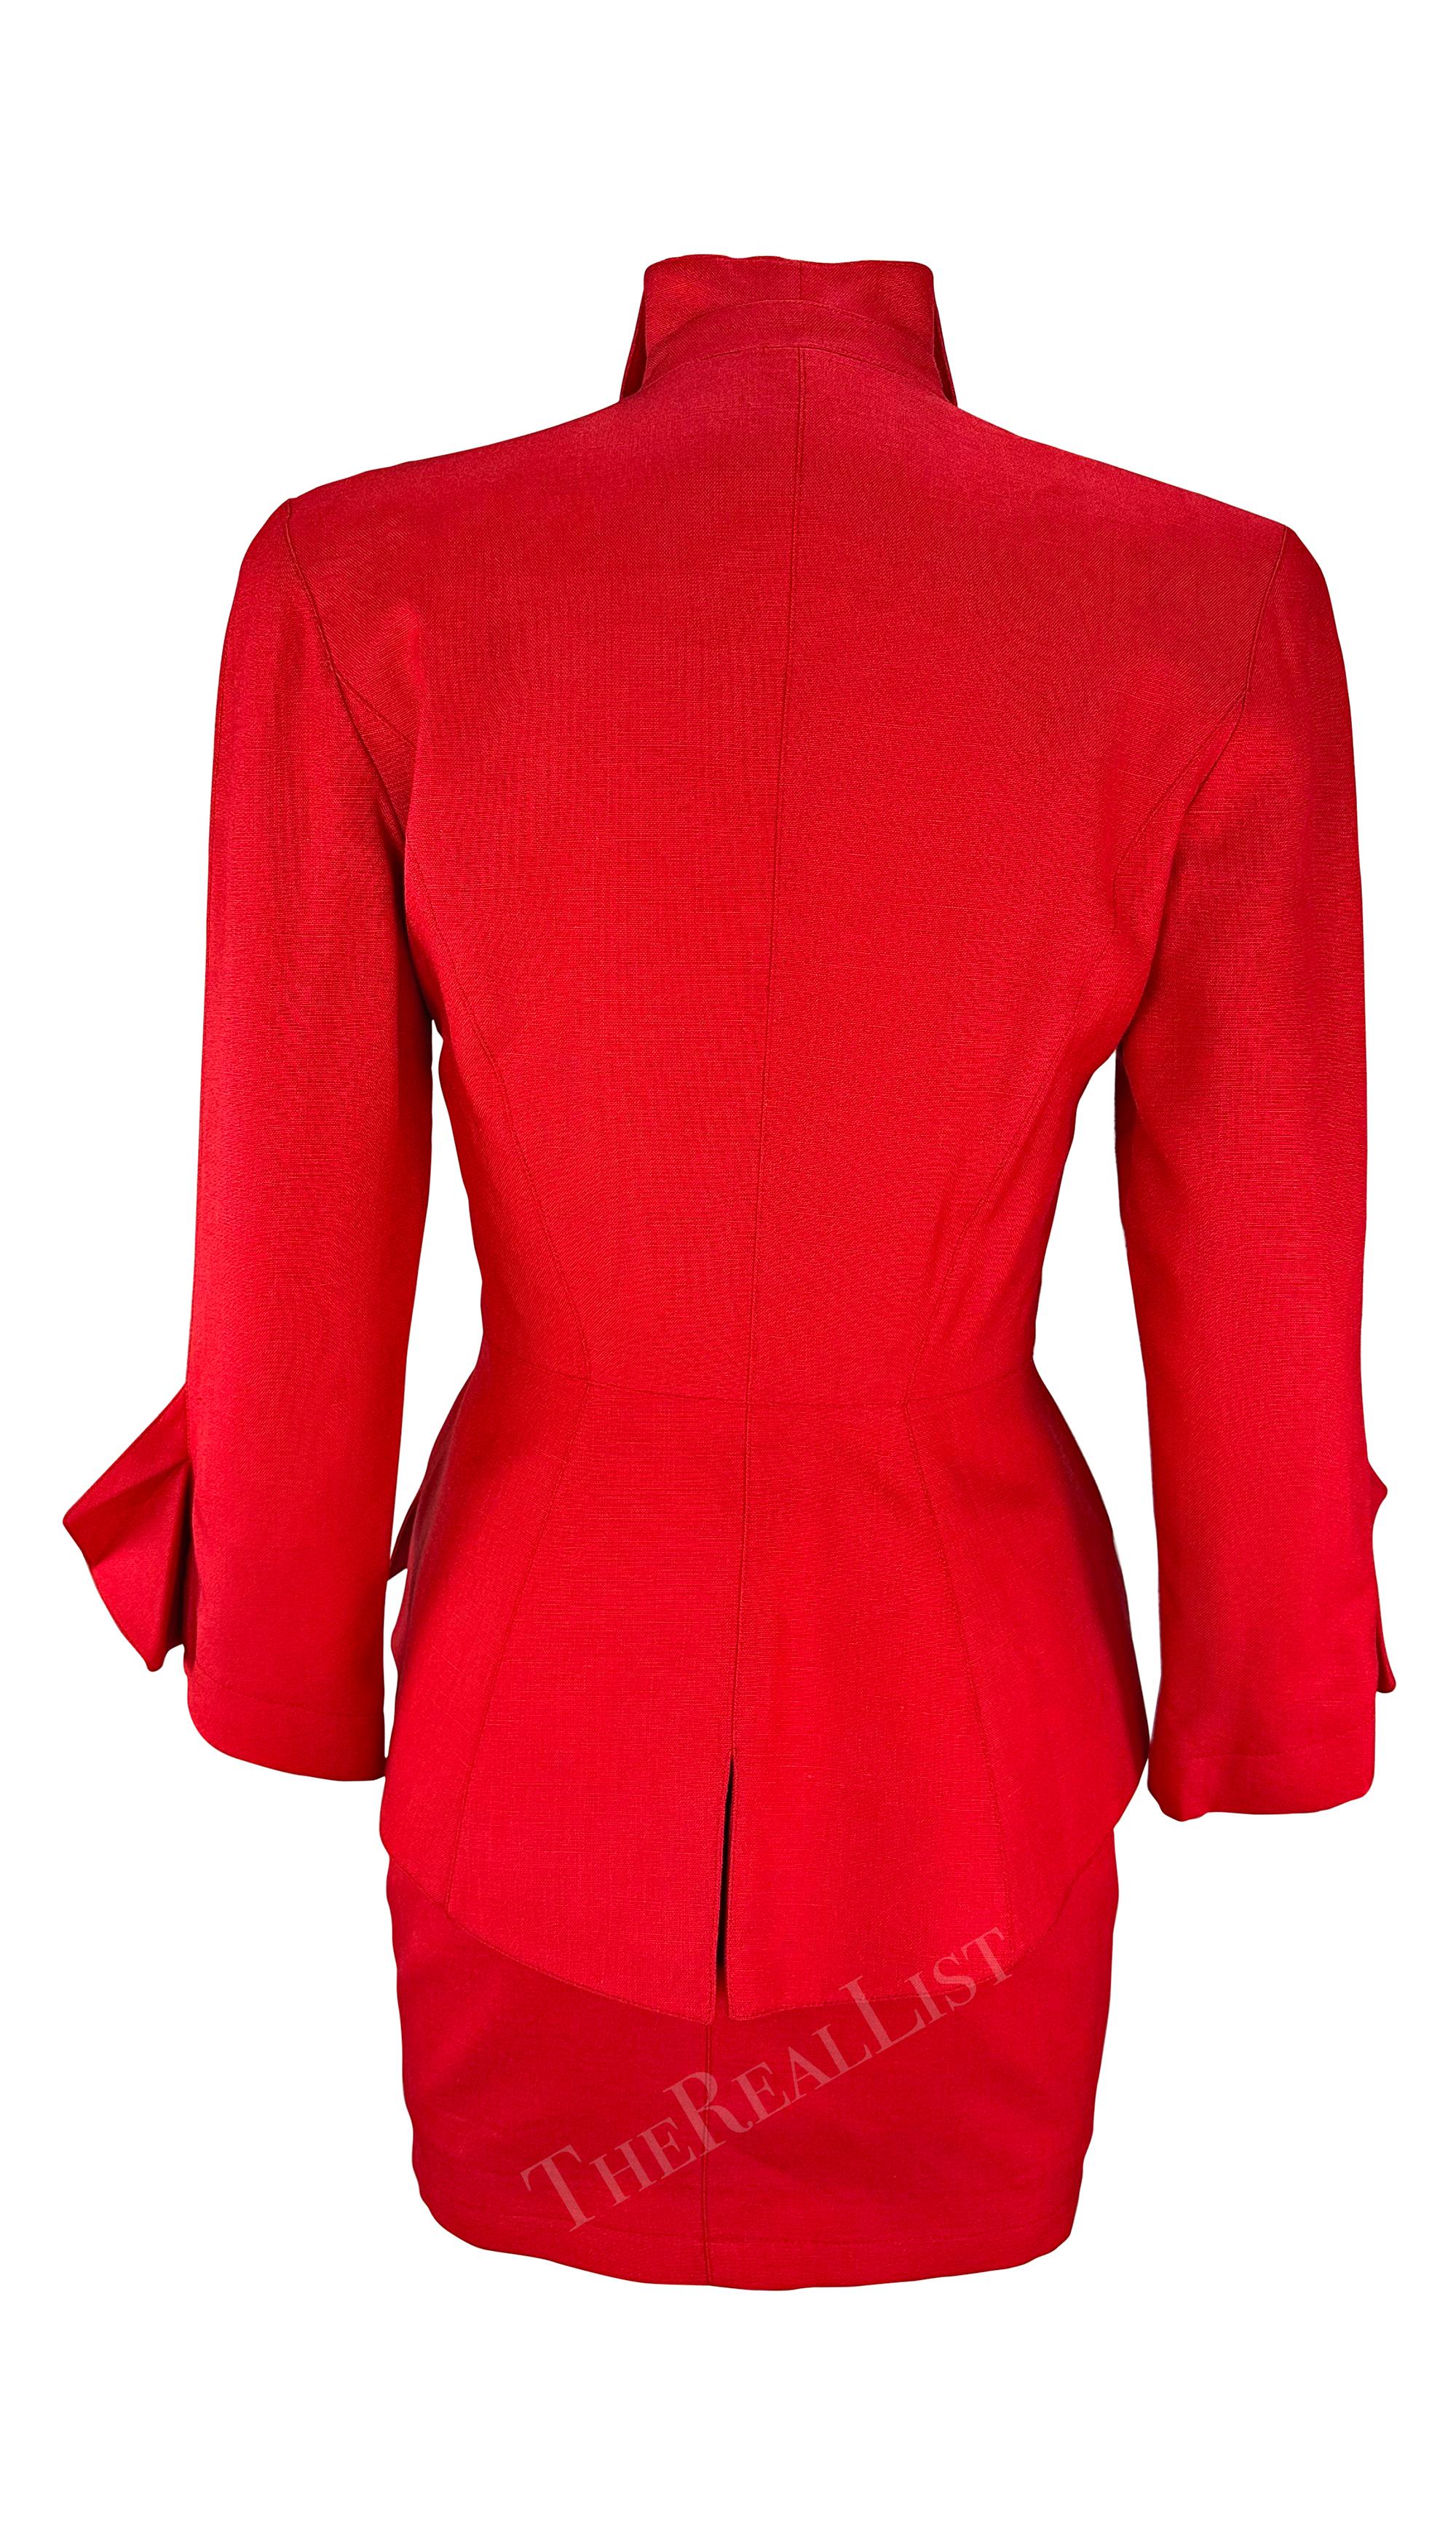 Cruise 1993 Thierry Mugler Runway Sculptural Fold Red Skirt Suit  For Sale 2